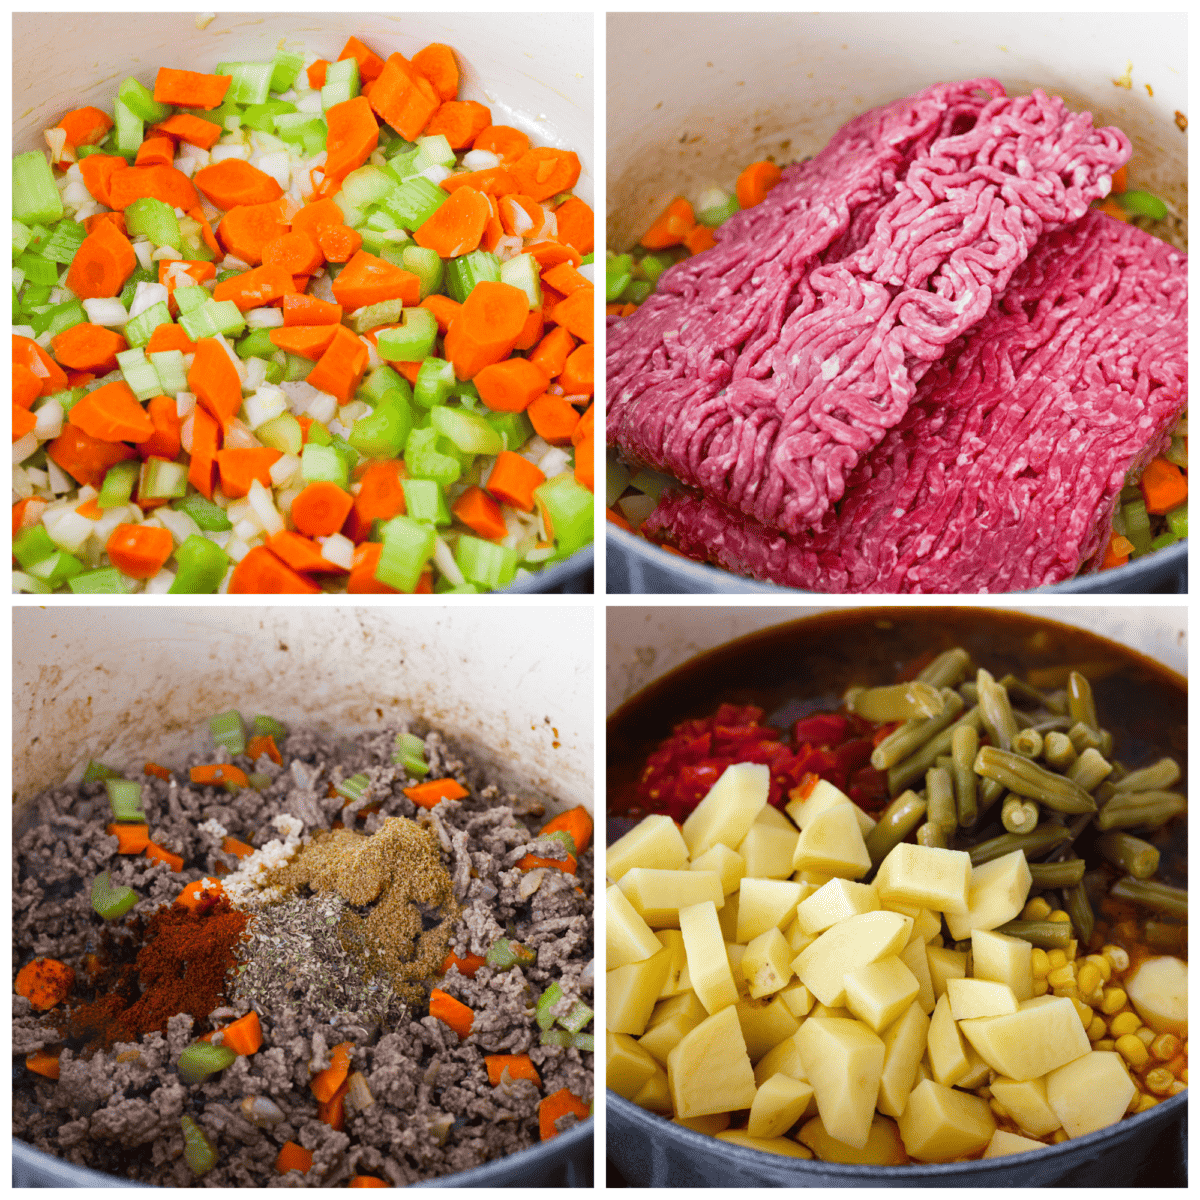 4 pictures showing how to mix the ingredients in the pot. 